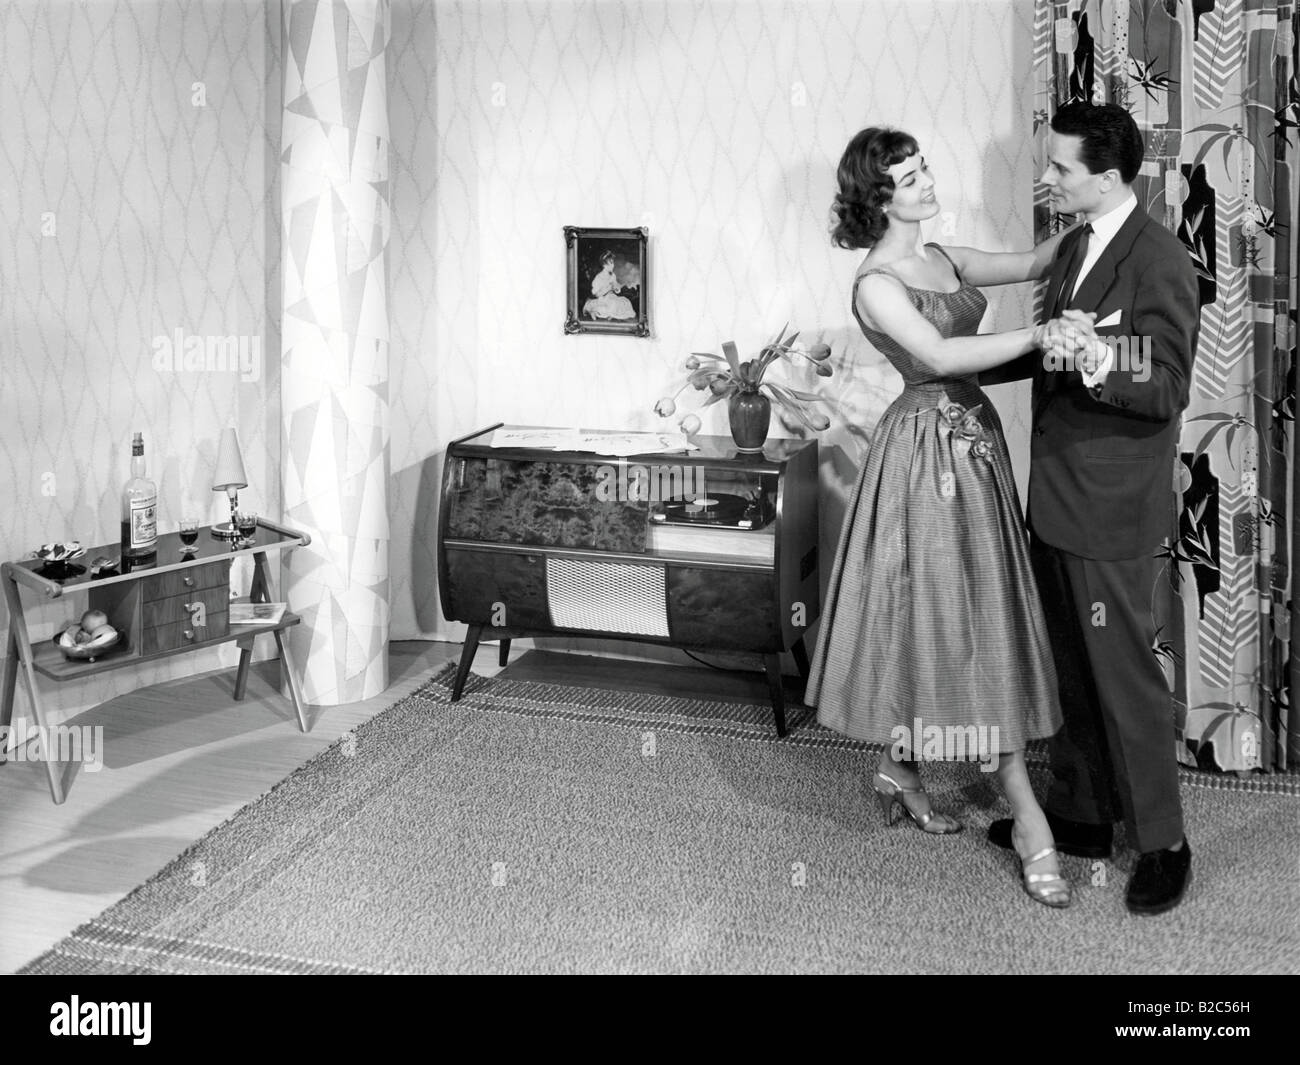 Couple dancing in the living room, historic picture from about 1955 Stock Photo